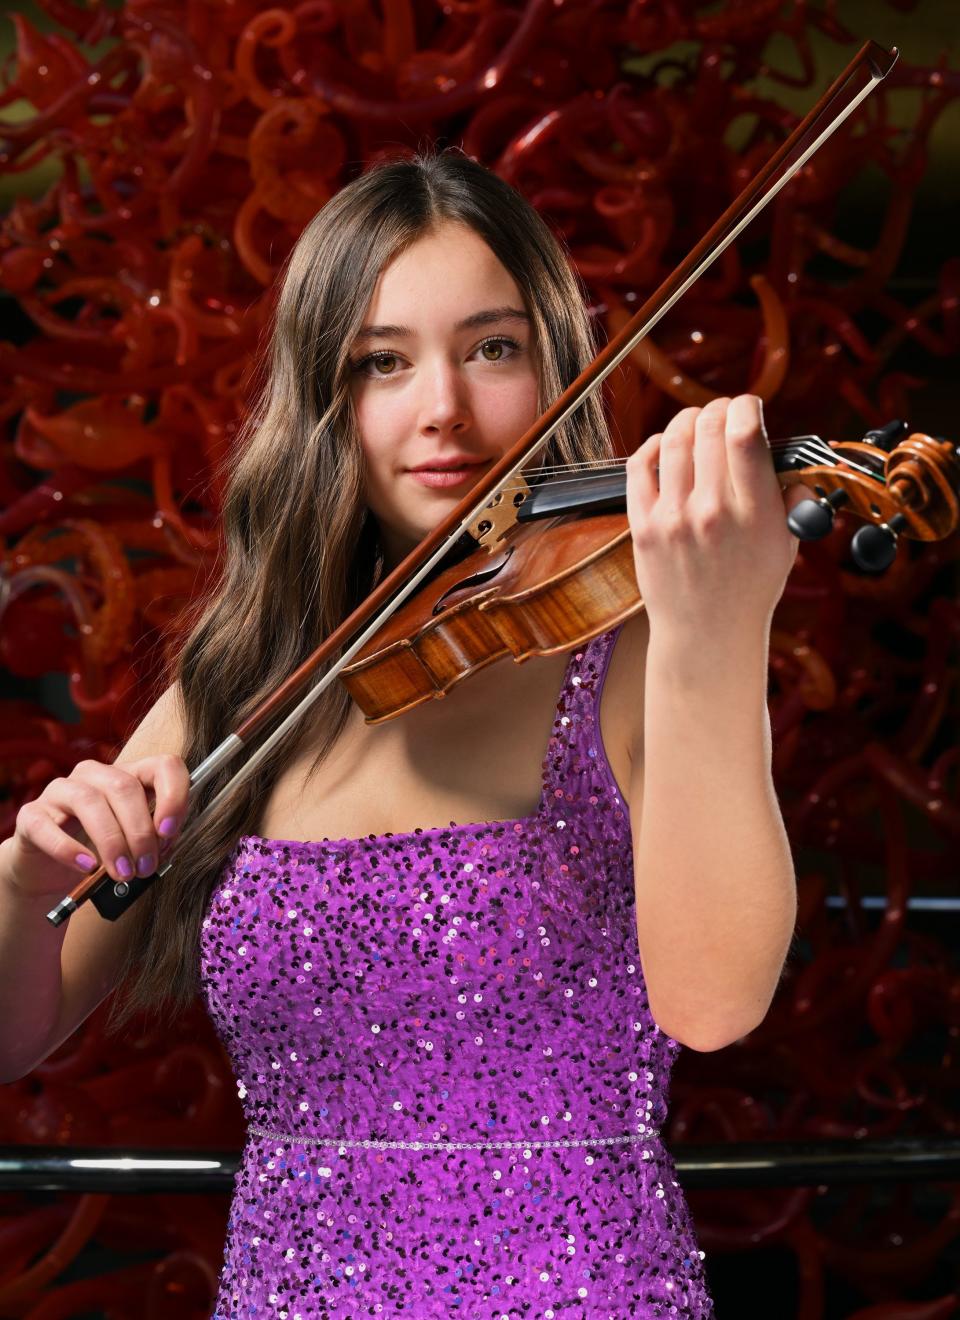 Alina Baron, violinist, poses for photos for the 2023 Salute to Youth Portraits at Abravanel Hall in Salt Lake City on Wednesday, Oct. 4, 2023. | Scott G Winterton, Deseret News